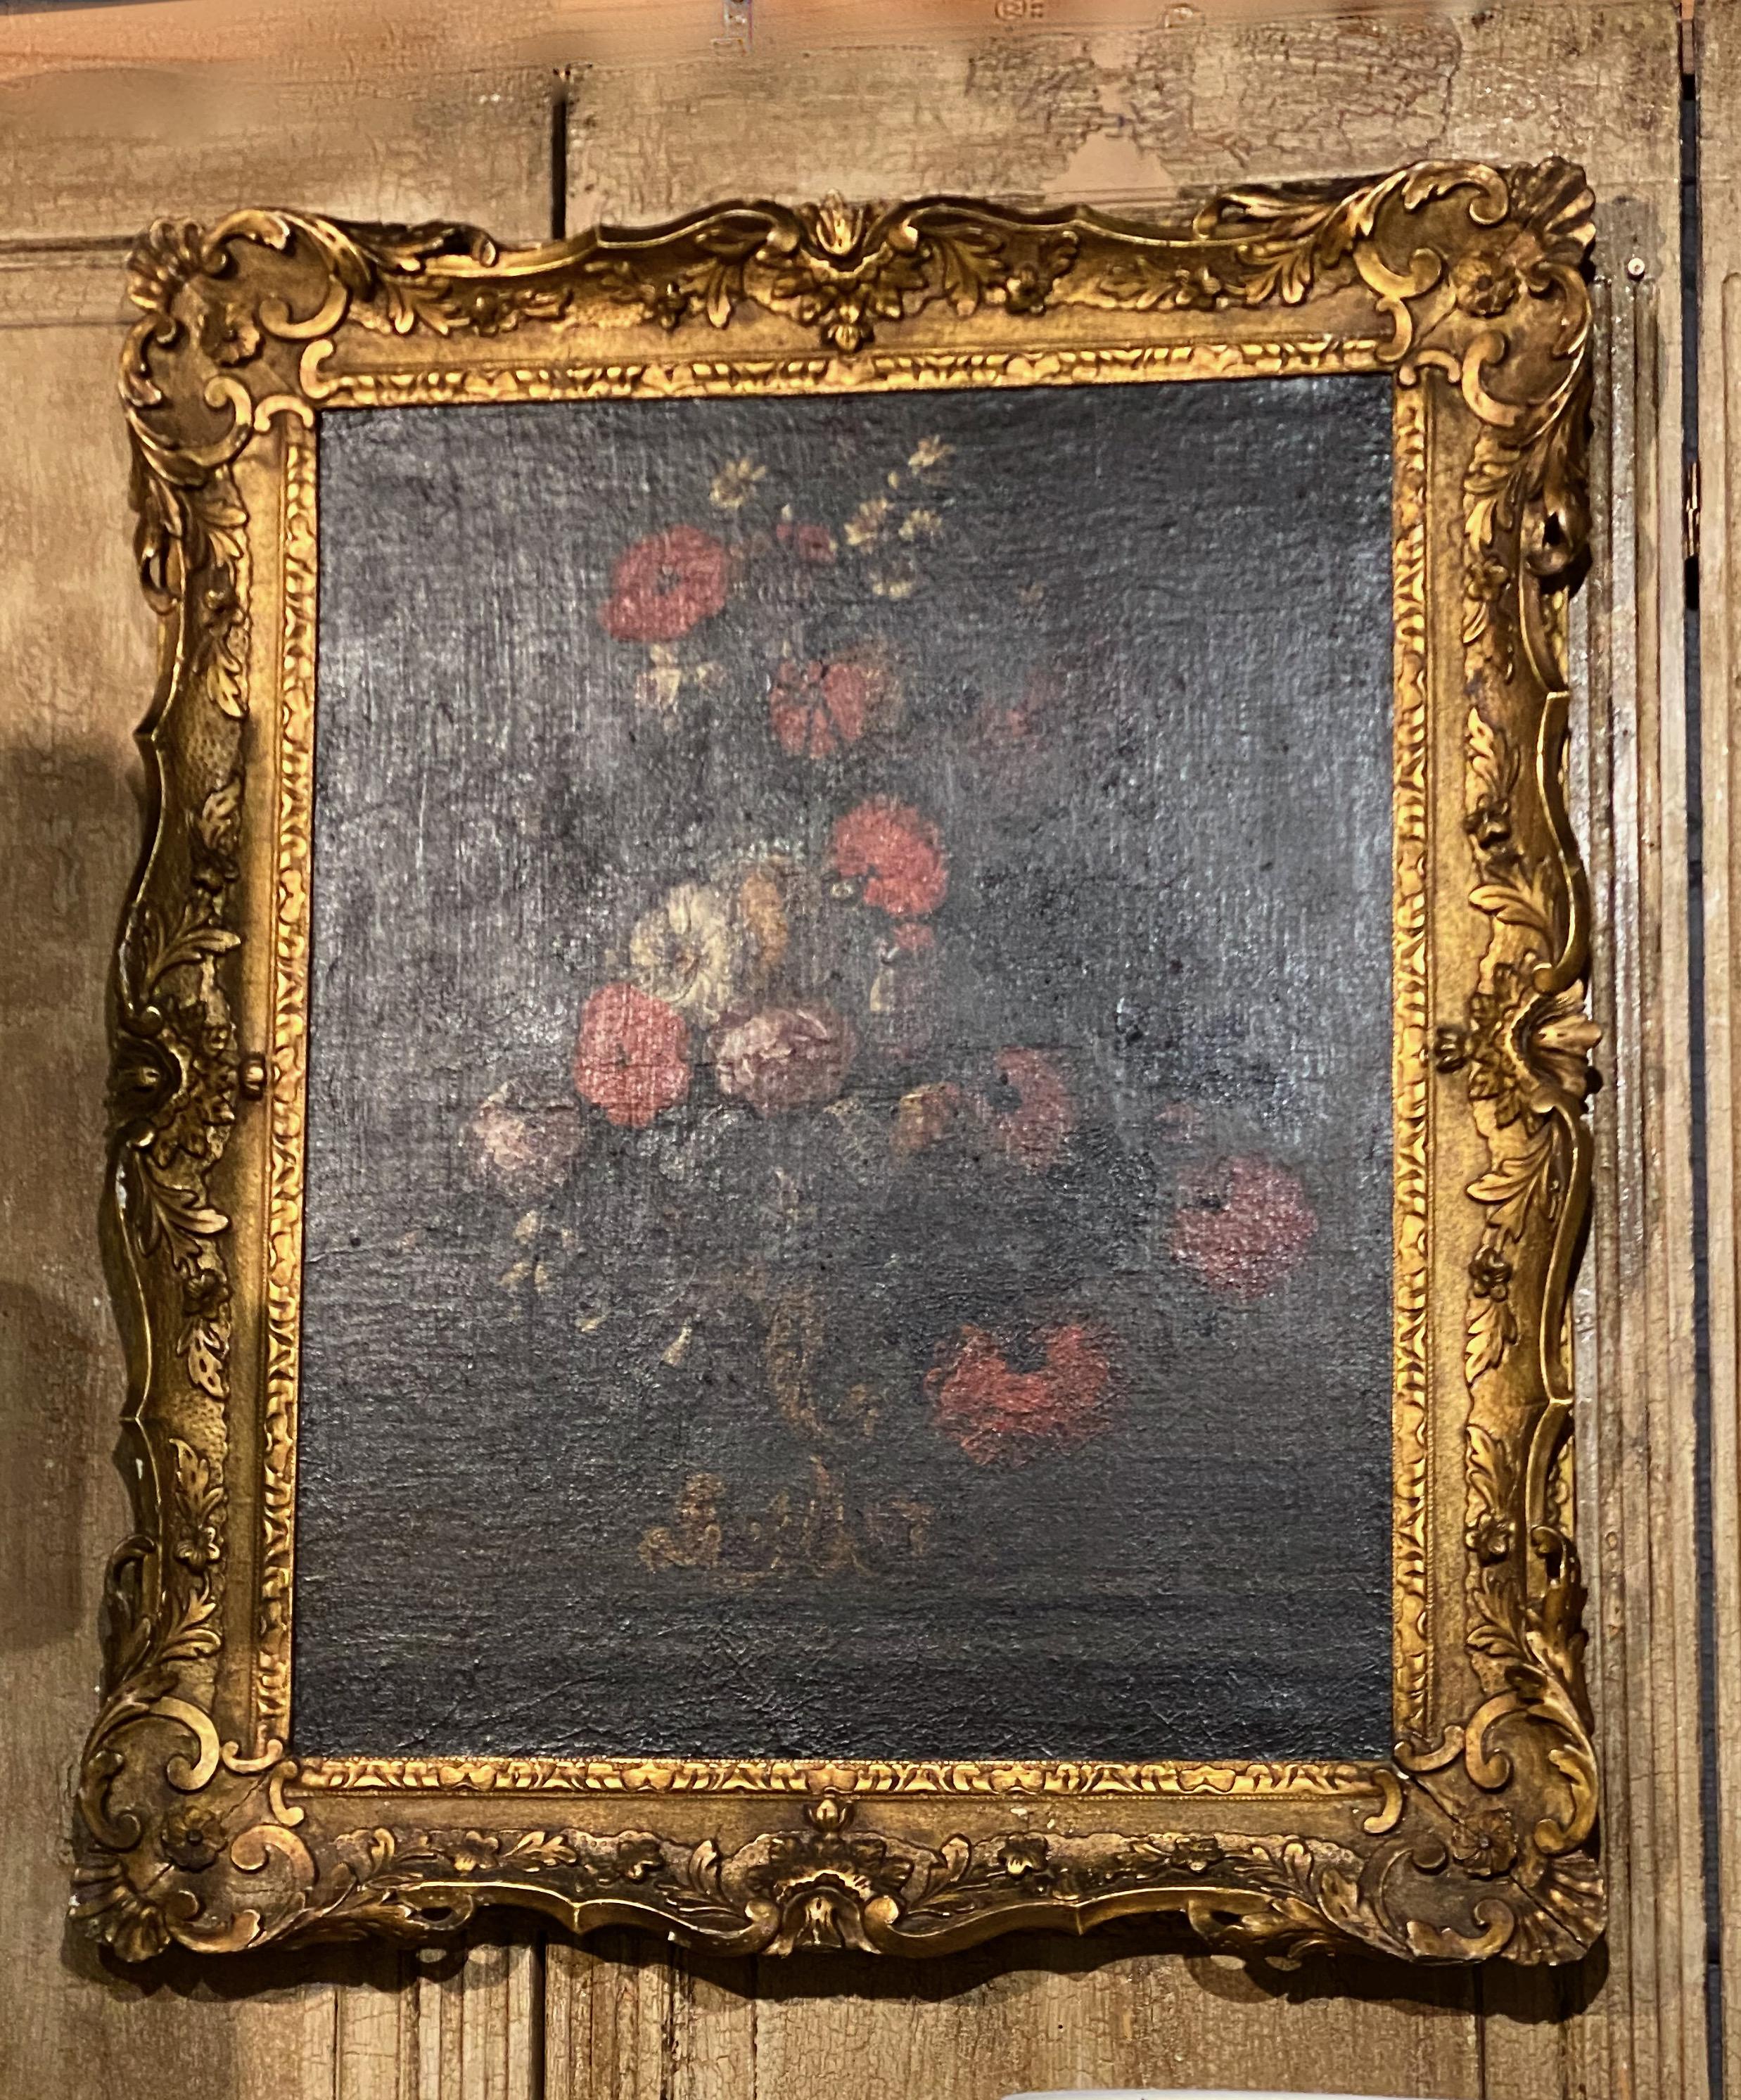 This is a classic Italian late 17th century floral still life. Although the painting is not signed, it has all of the hallmarks of being created by a master painter. The painting and the original frame are in very good condition for their 300 plus